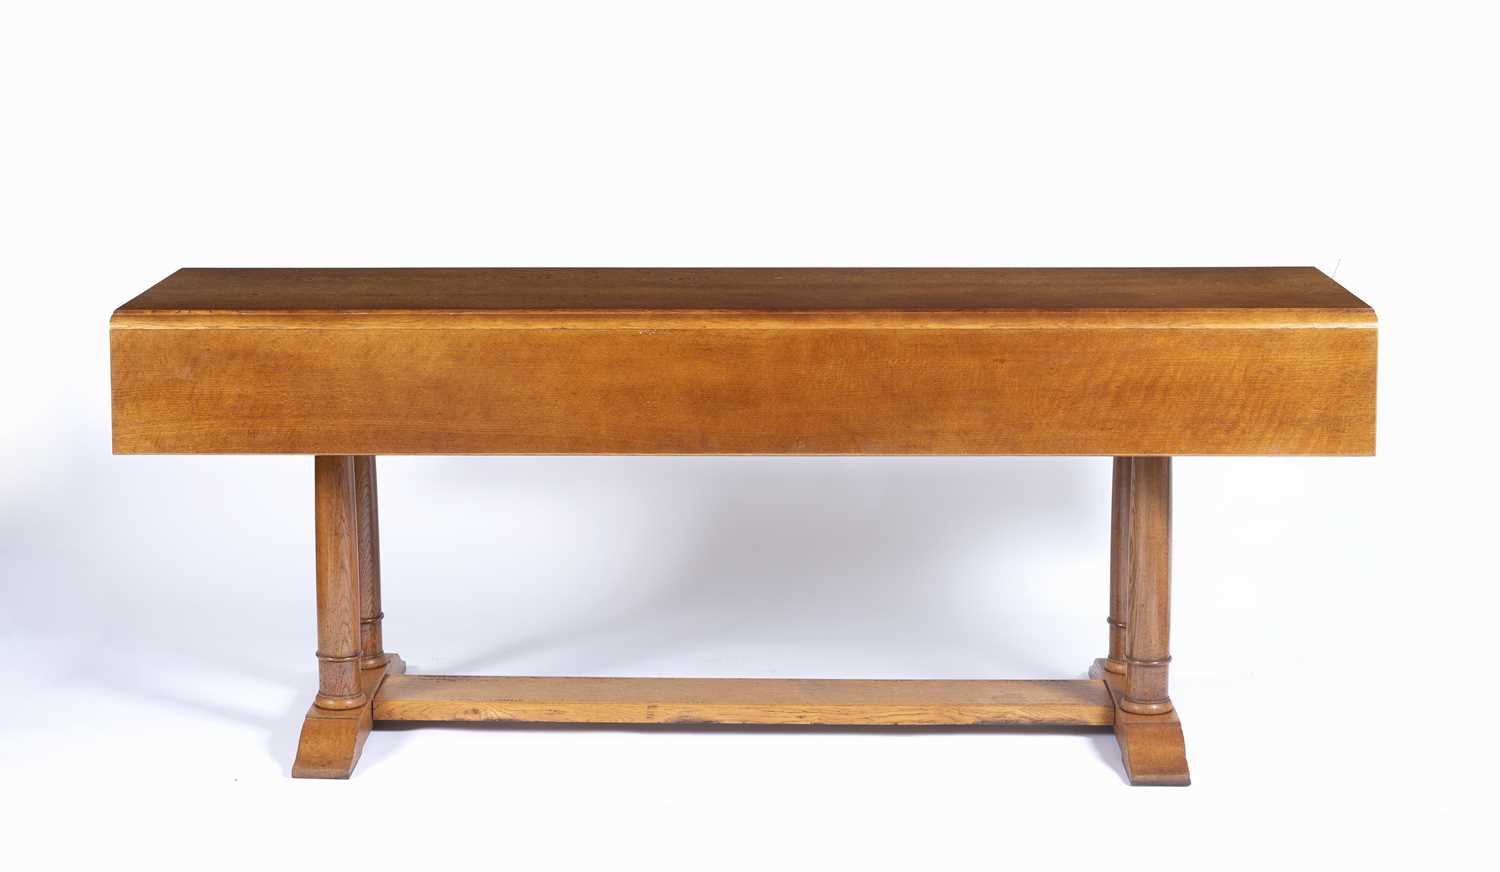 Heals 'Tilden' oak refectory table, circa 1920, with later modifications to make it into a drop-leaf - Image 4 of 4